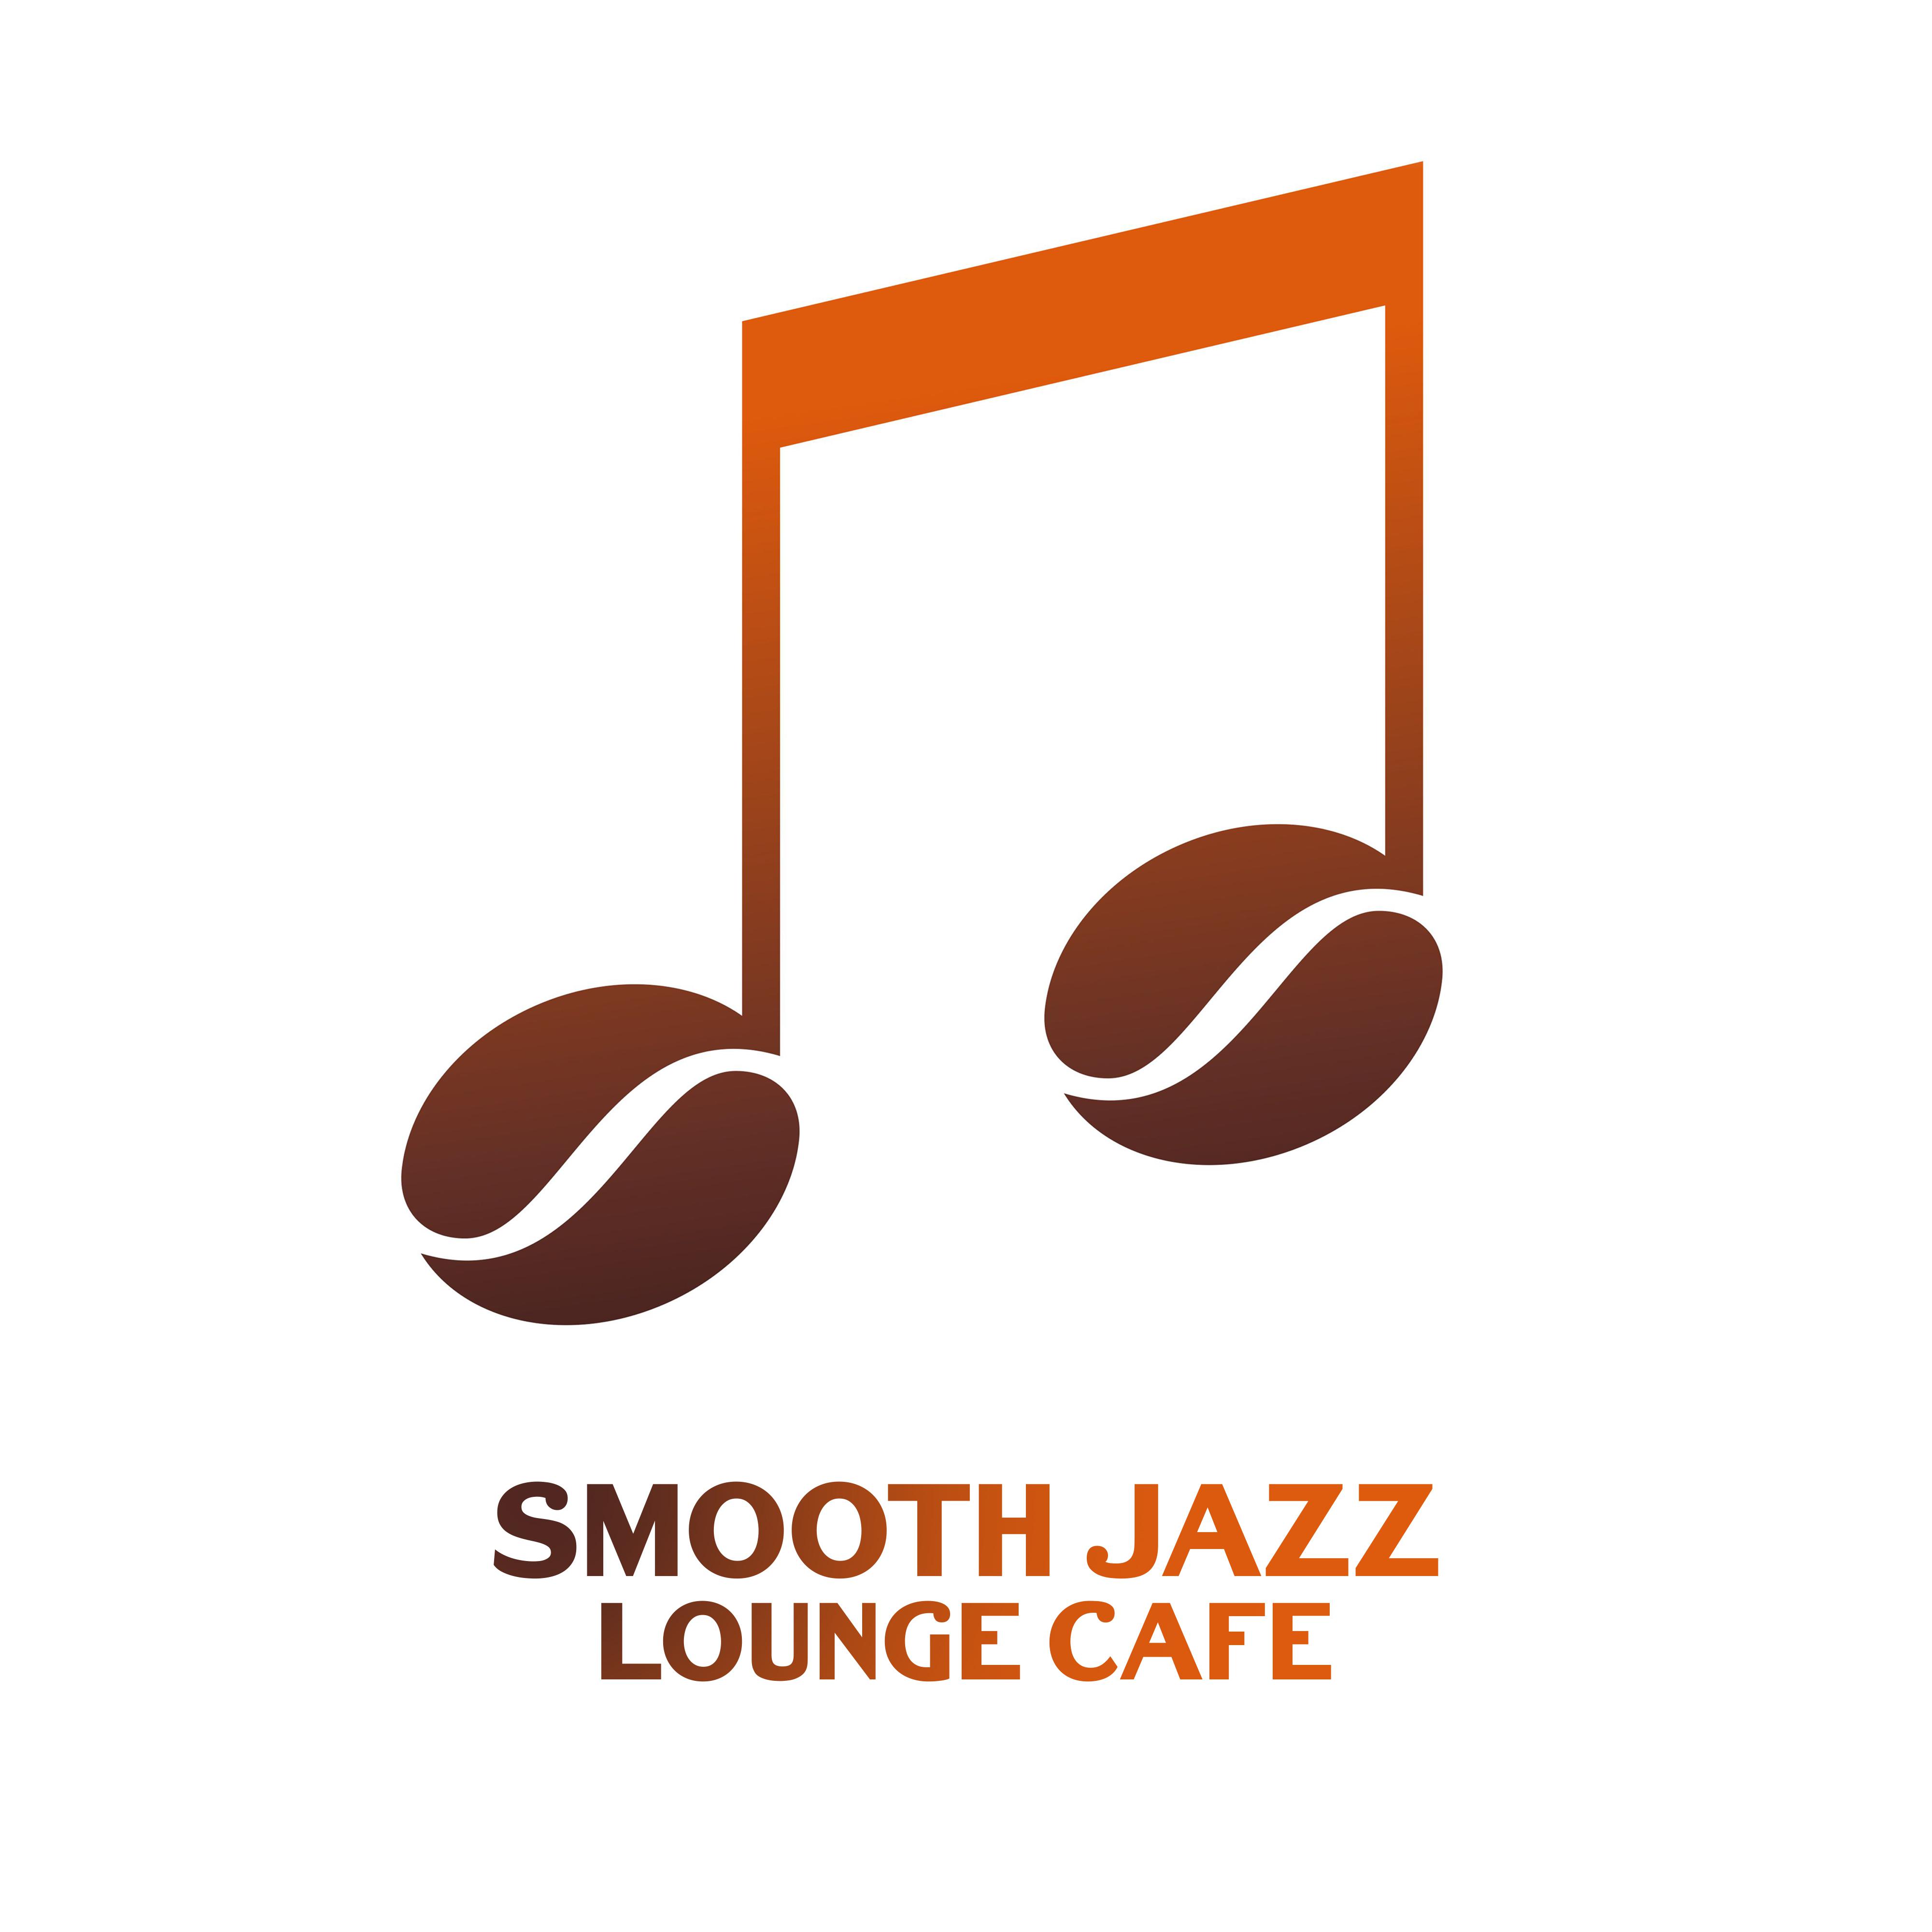 Smooth Jazz Lounge Cafe  Background Music for Friends Meeting